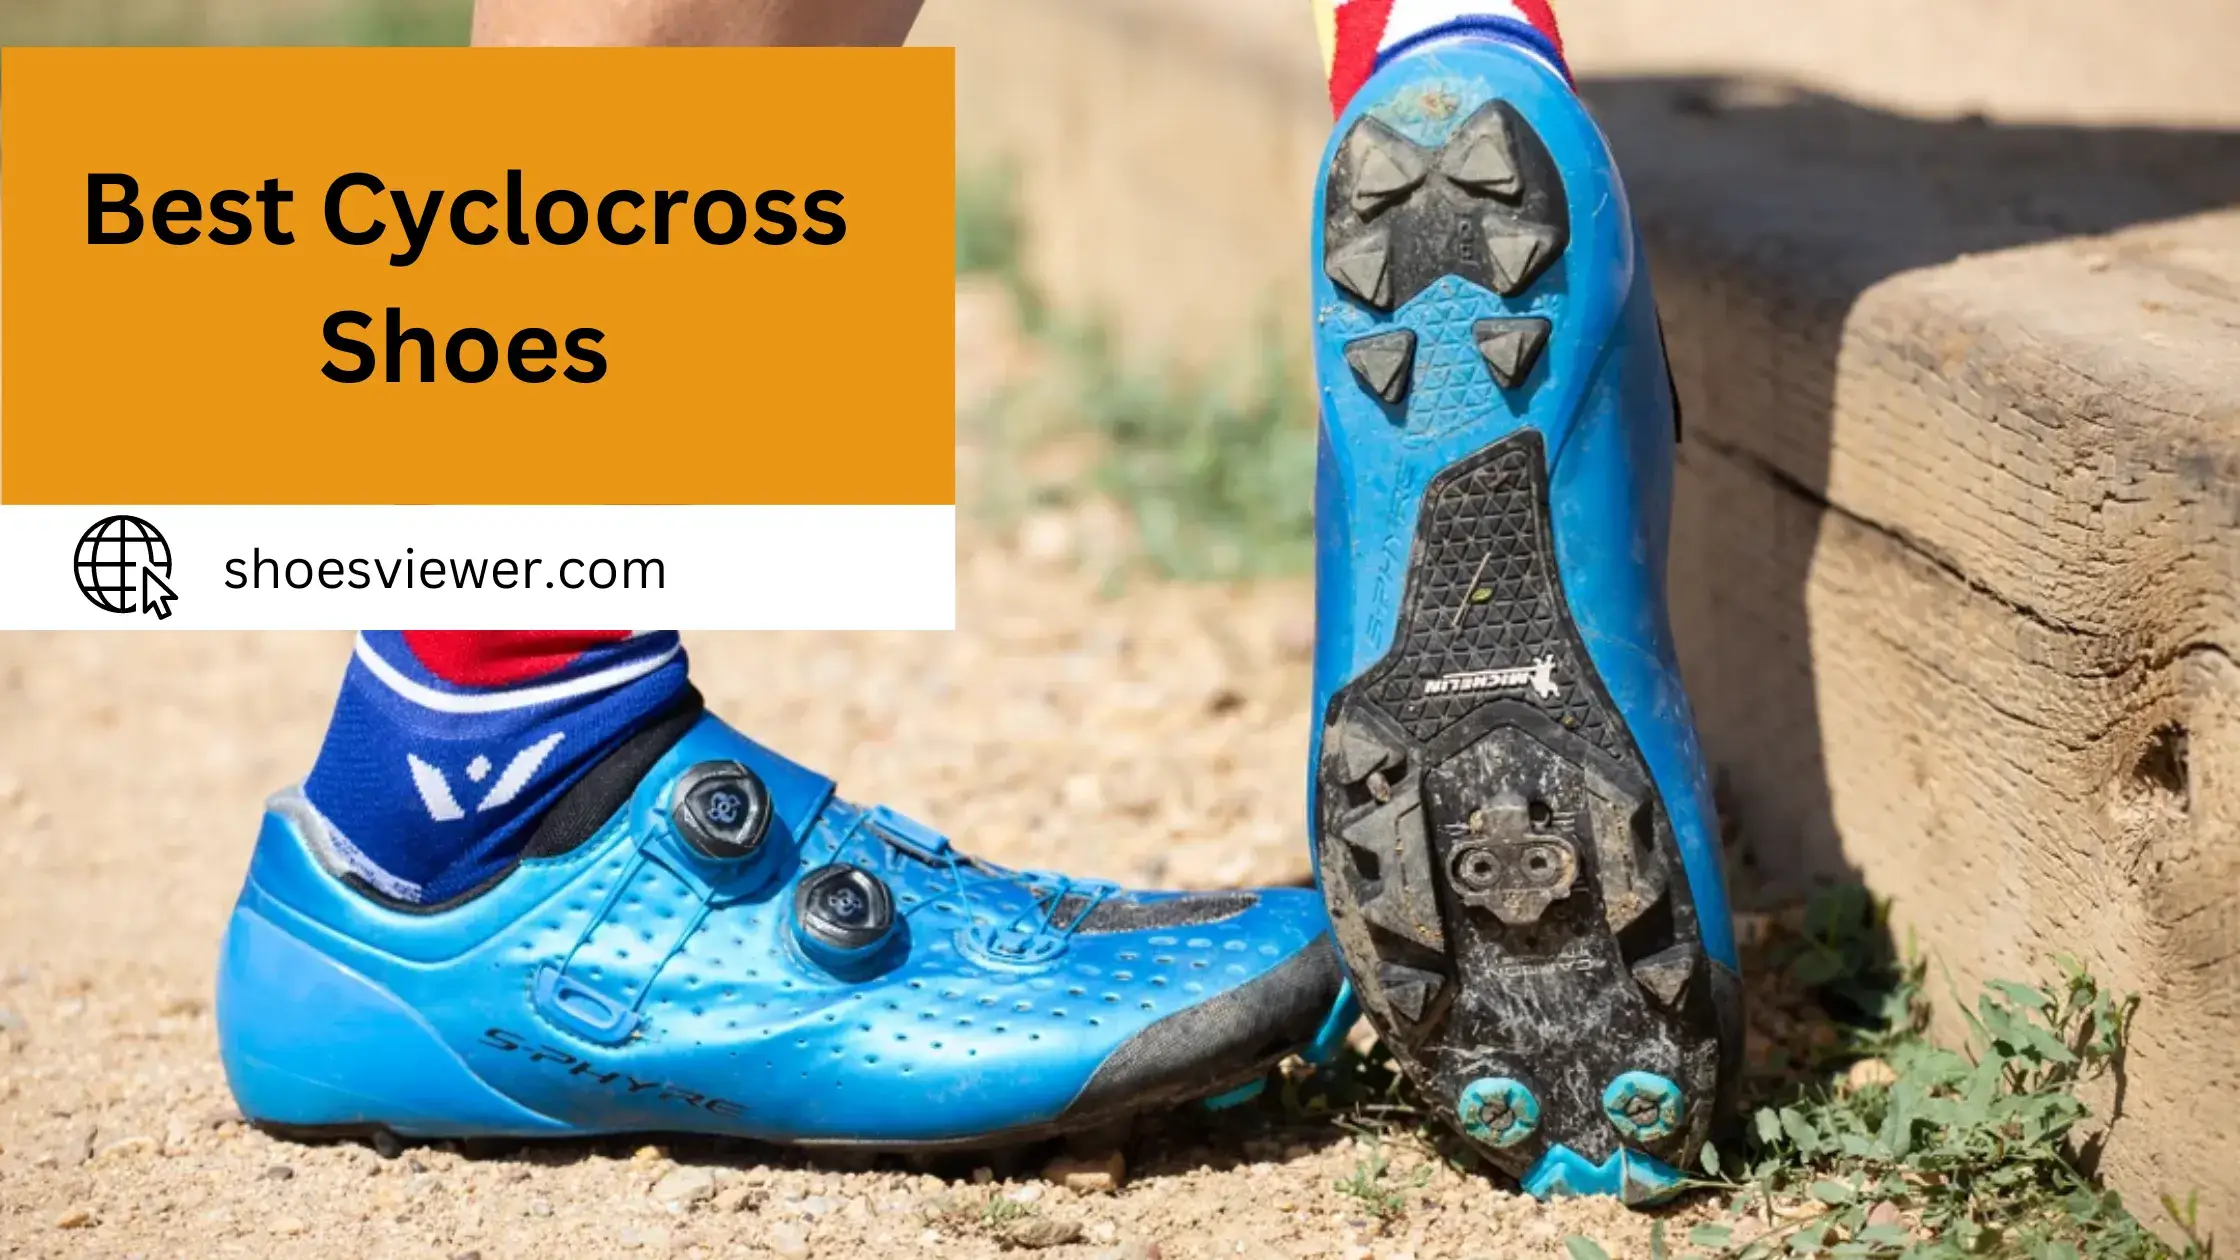 Best Cyclocross Shoes - (An In-Depth Guide)